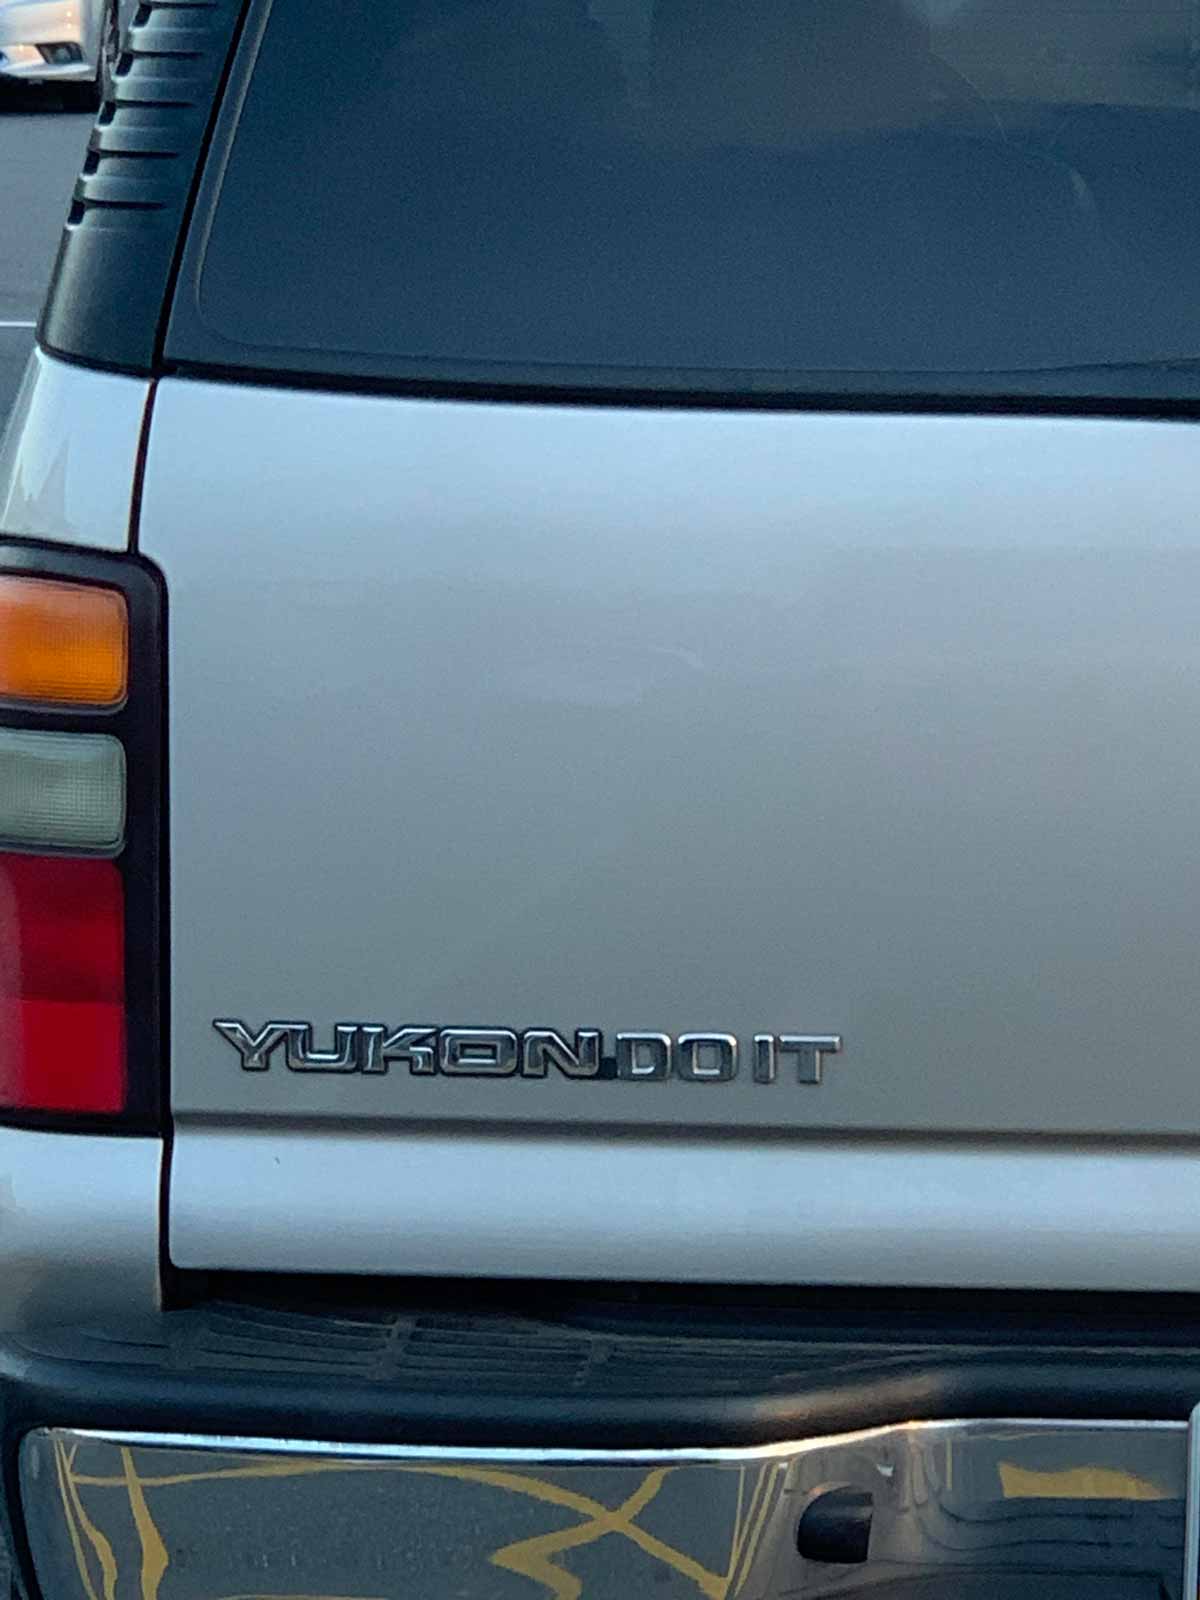 Funny picture of the back of Yukon vehicle that says 'Yukon Do It'